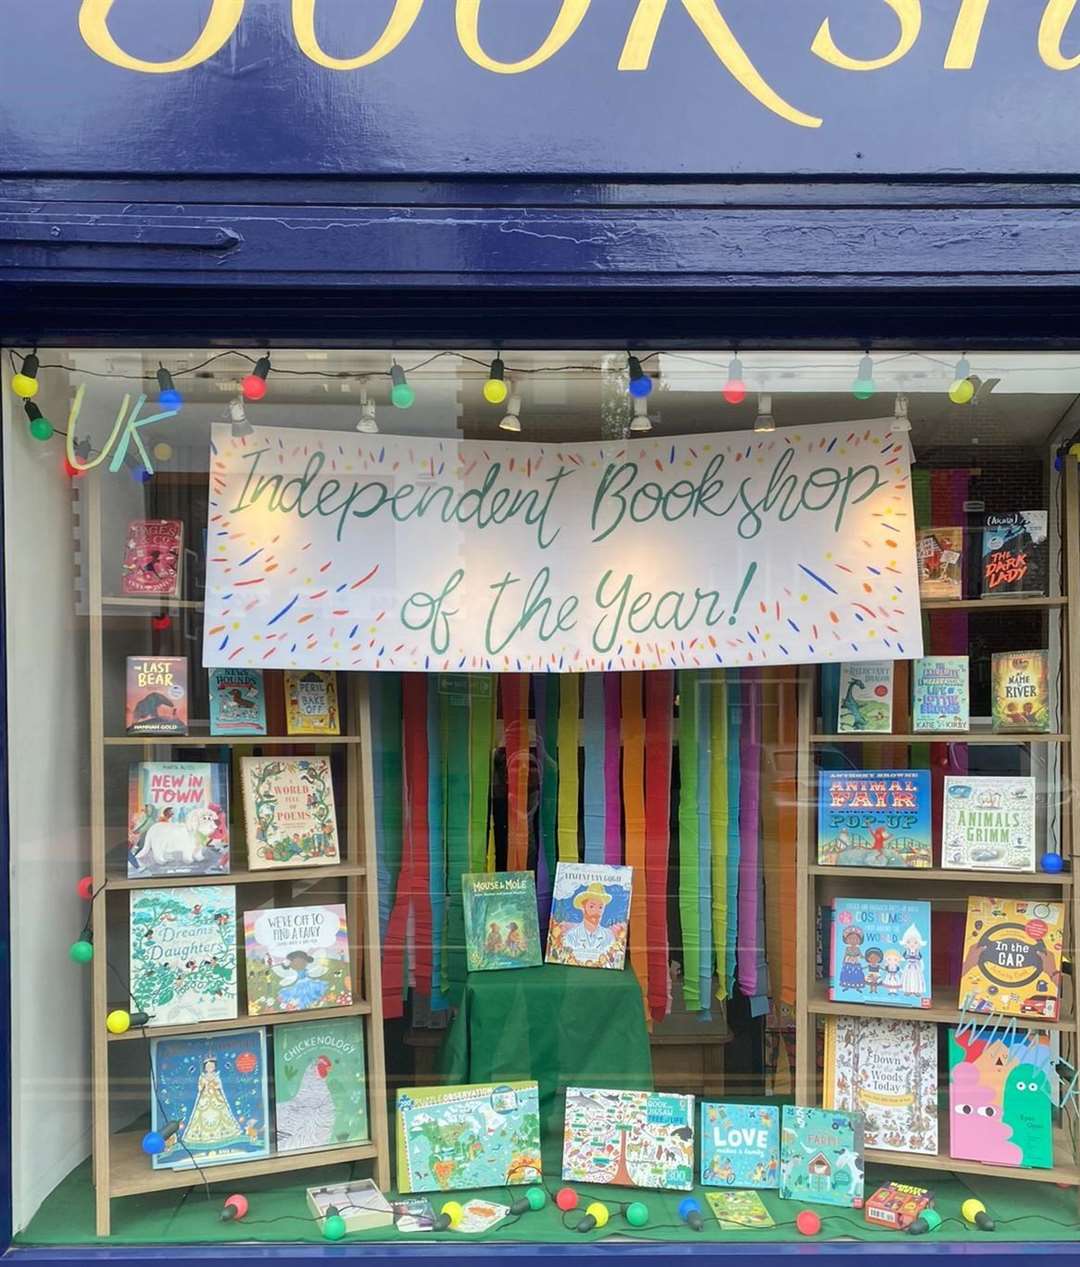 It was named the UK Independent Bookshop of the Year